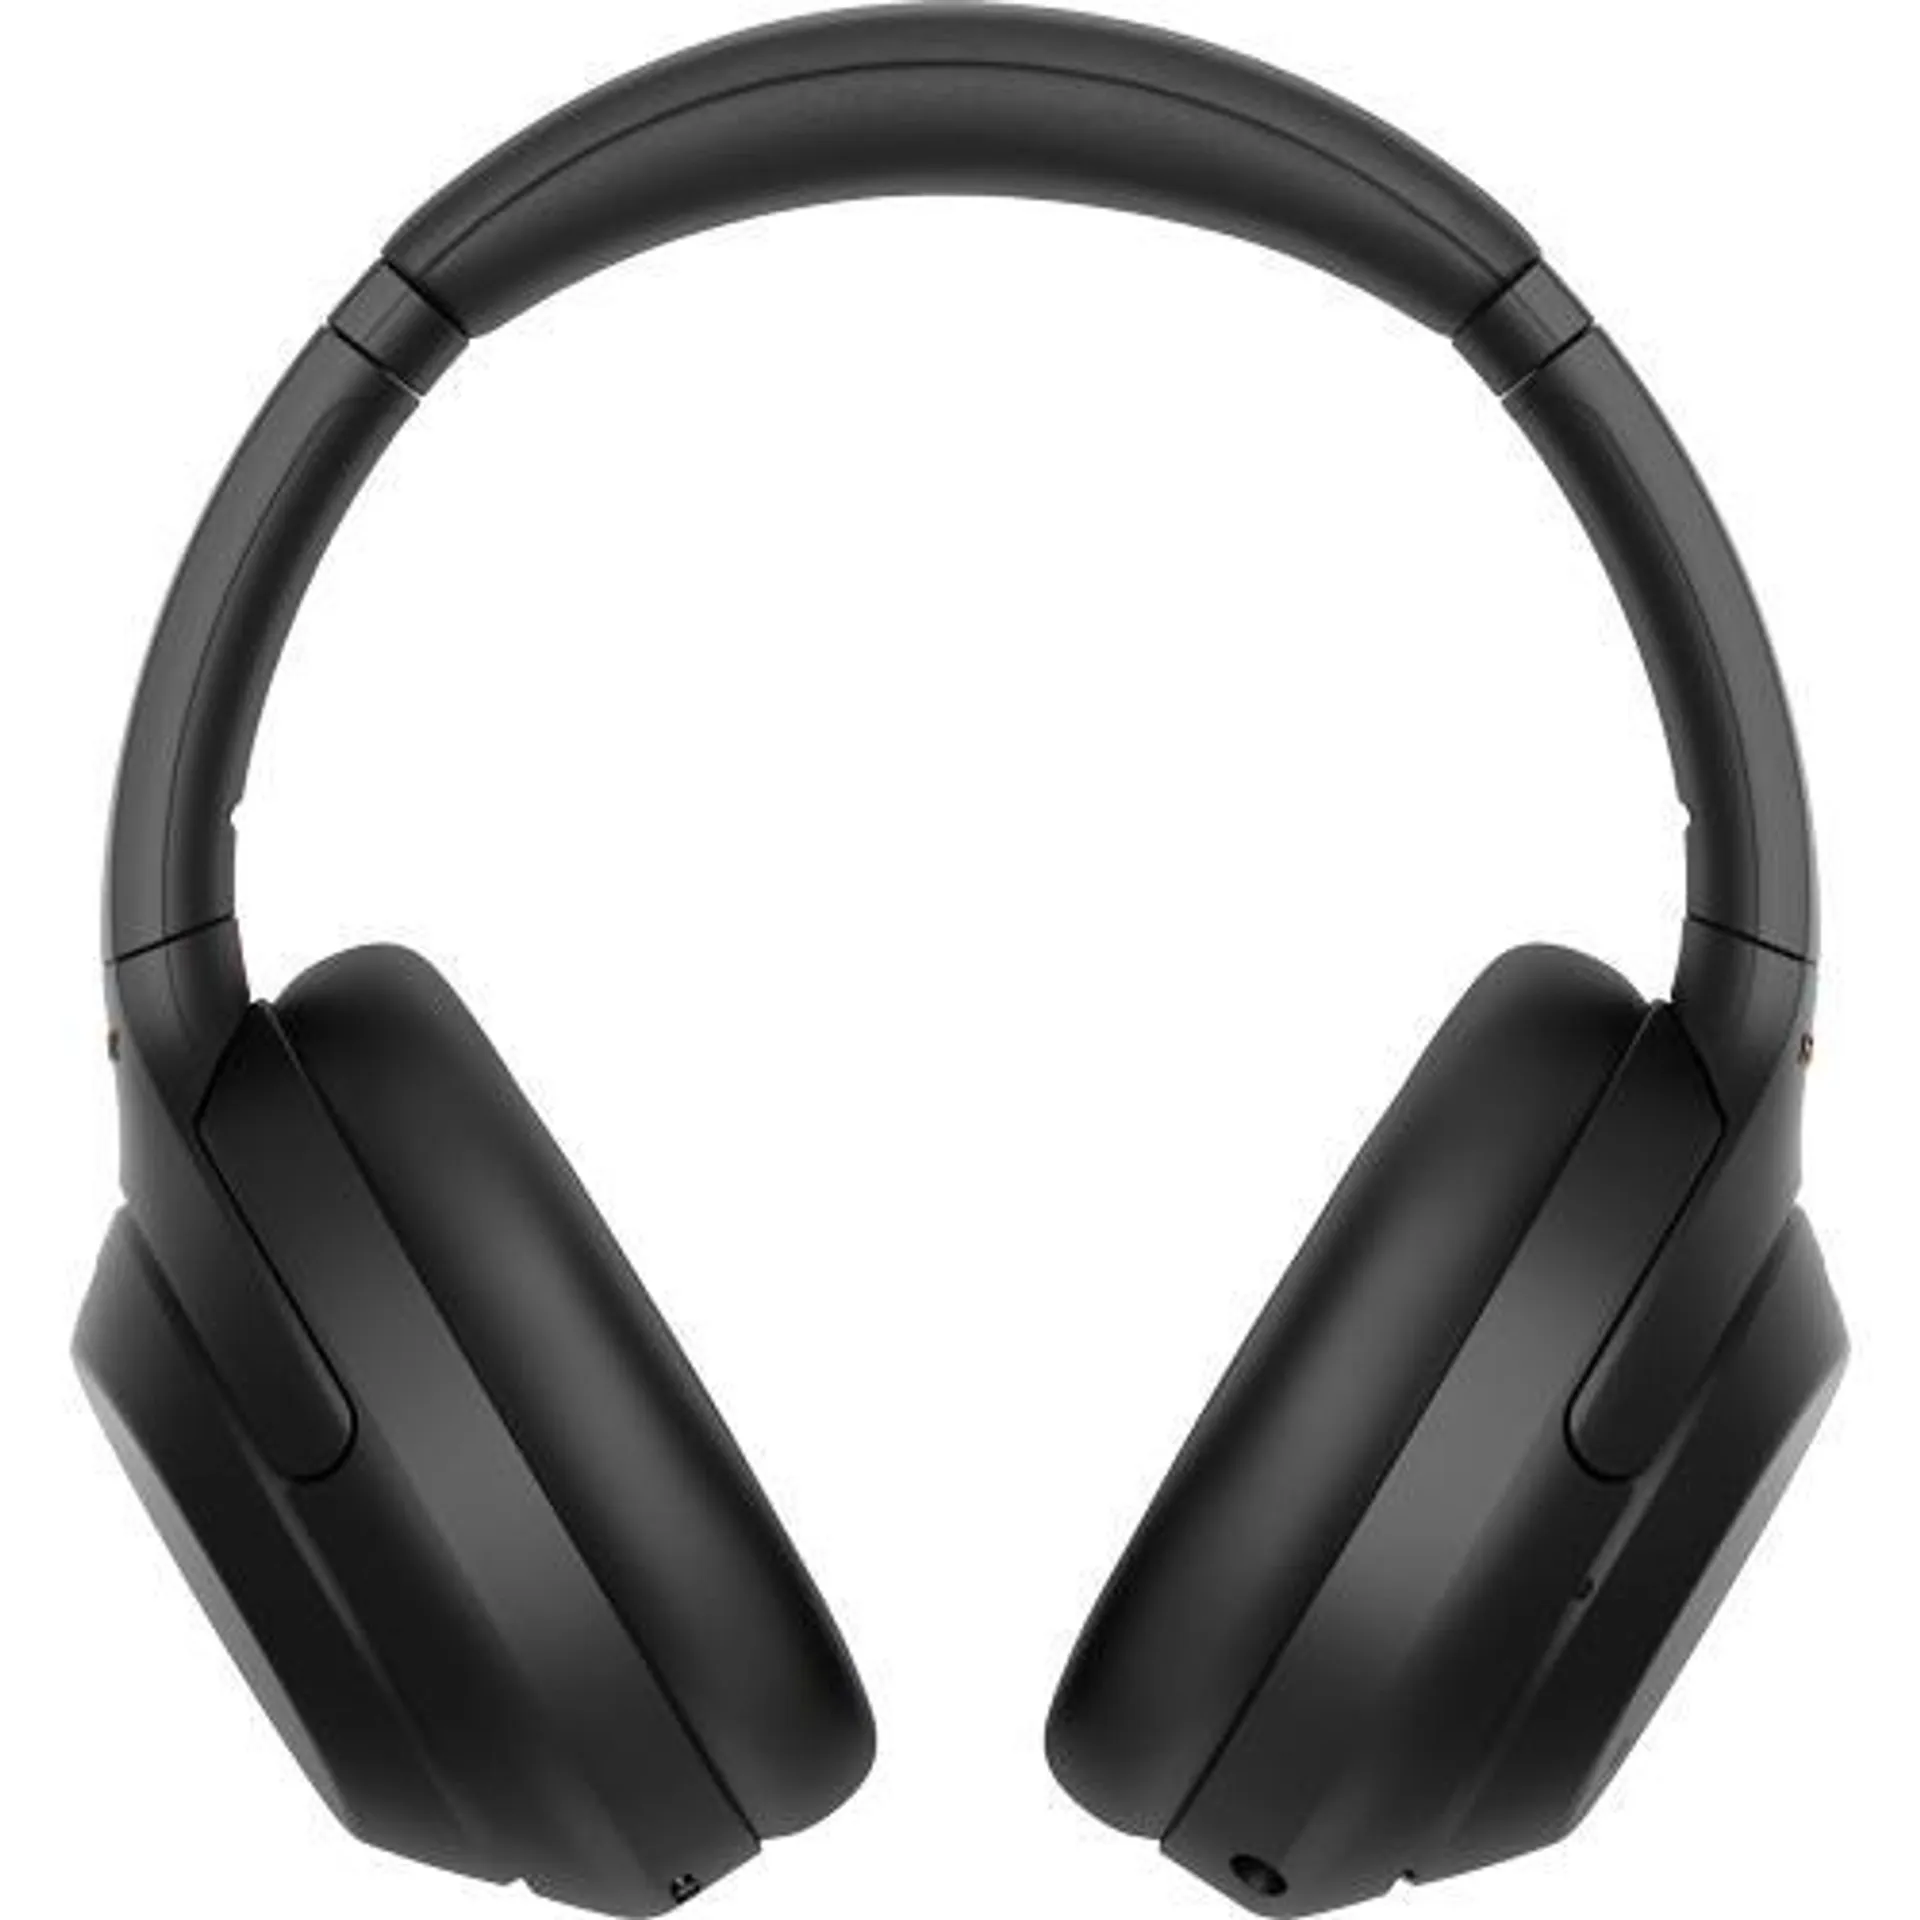 Noise Cancelling Over The Ear Headphones - Black